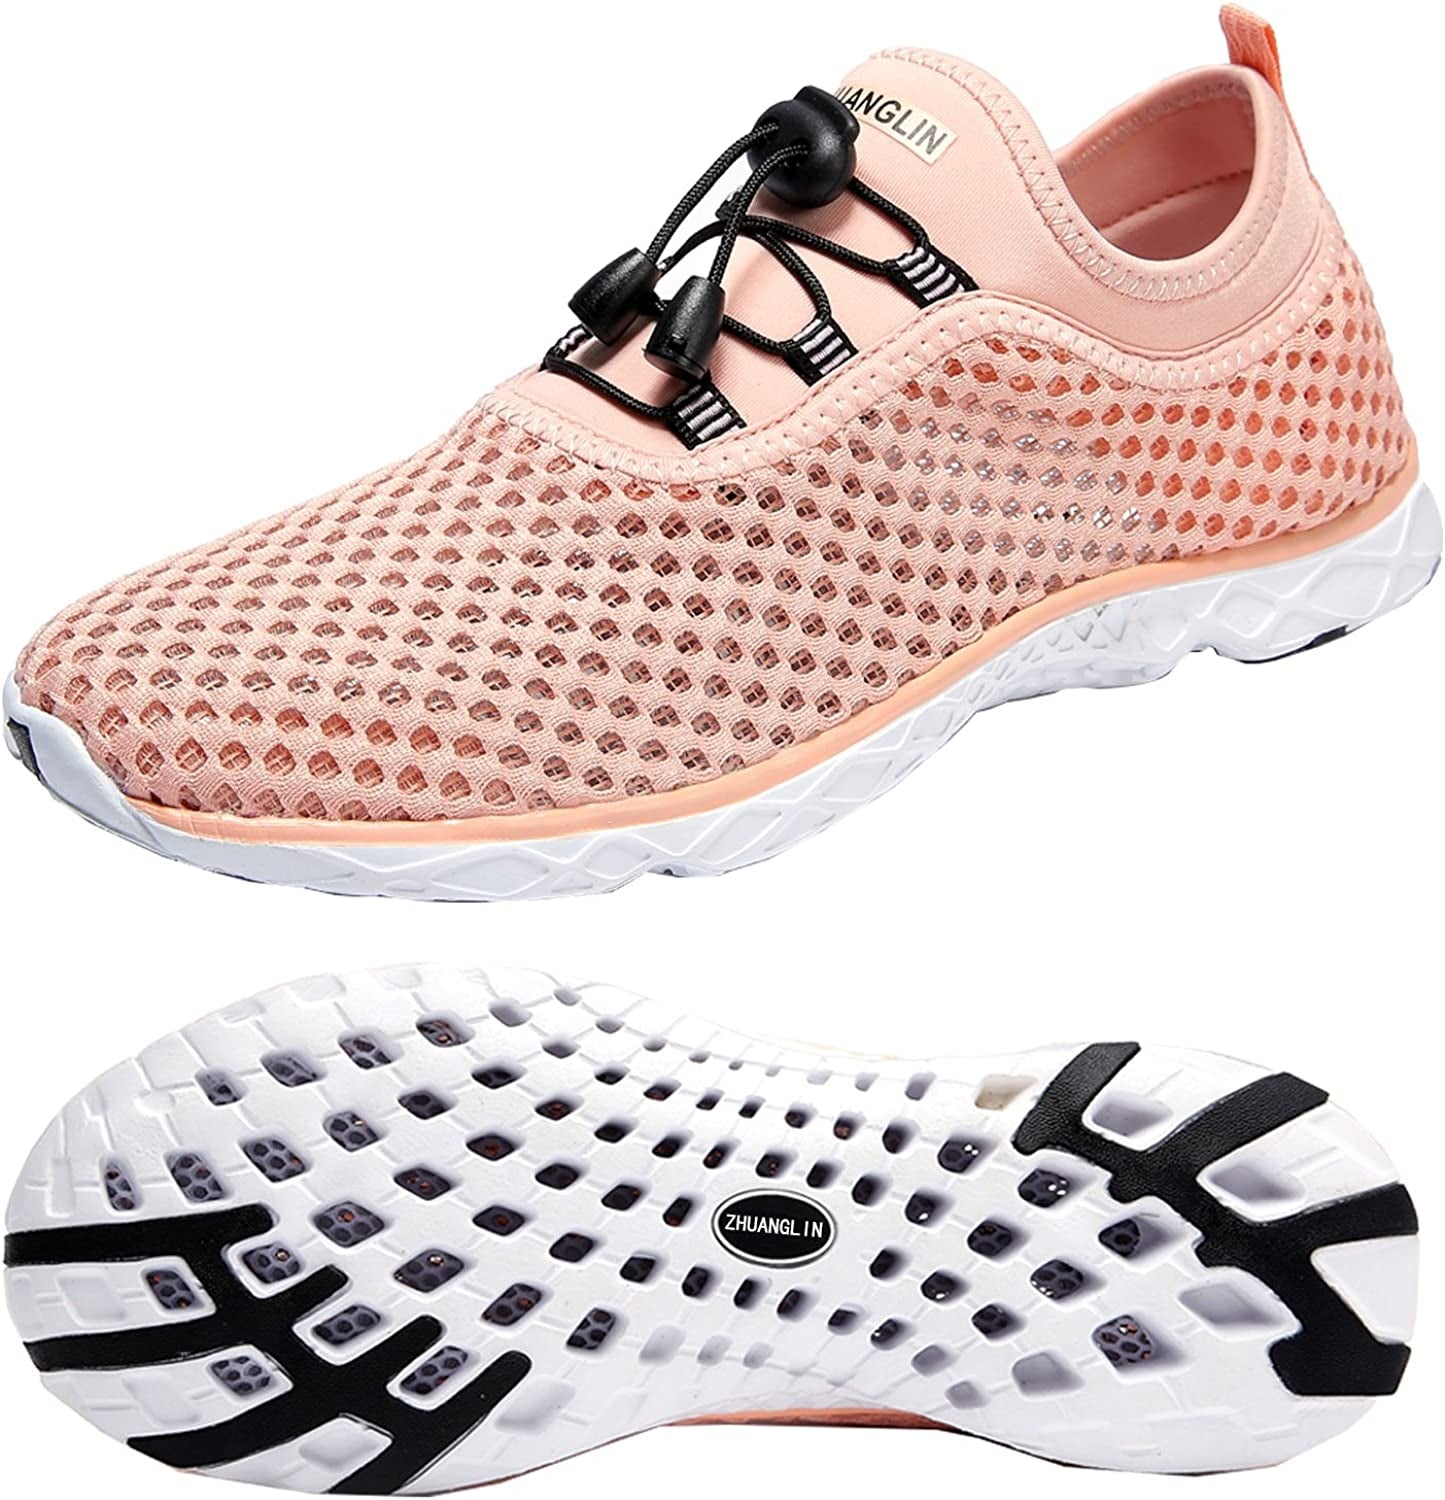 "Enhance Your Style and Stay Dry with Women's Rapid-Drying Aqua Water Shoes!"